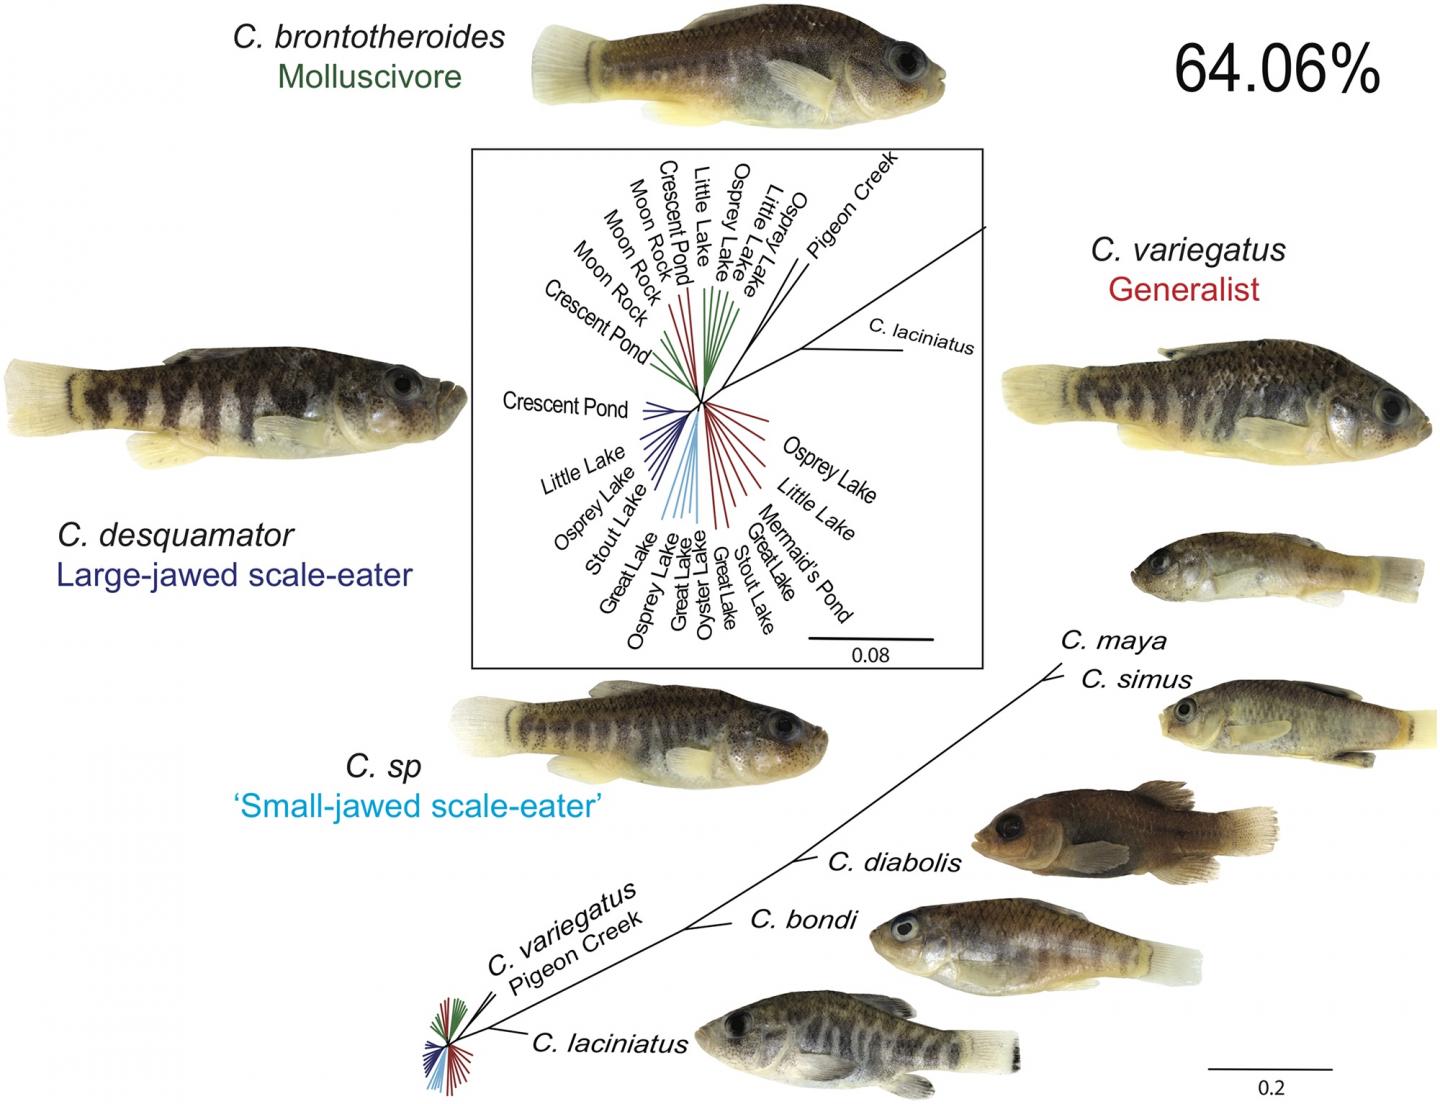 San Salvador Pupfish Acquired Genetic Variation from Fish on Other Islands to Adapt to New Foods